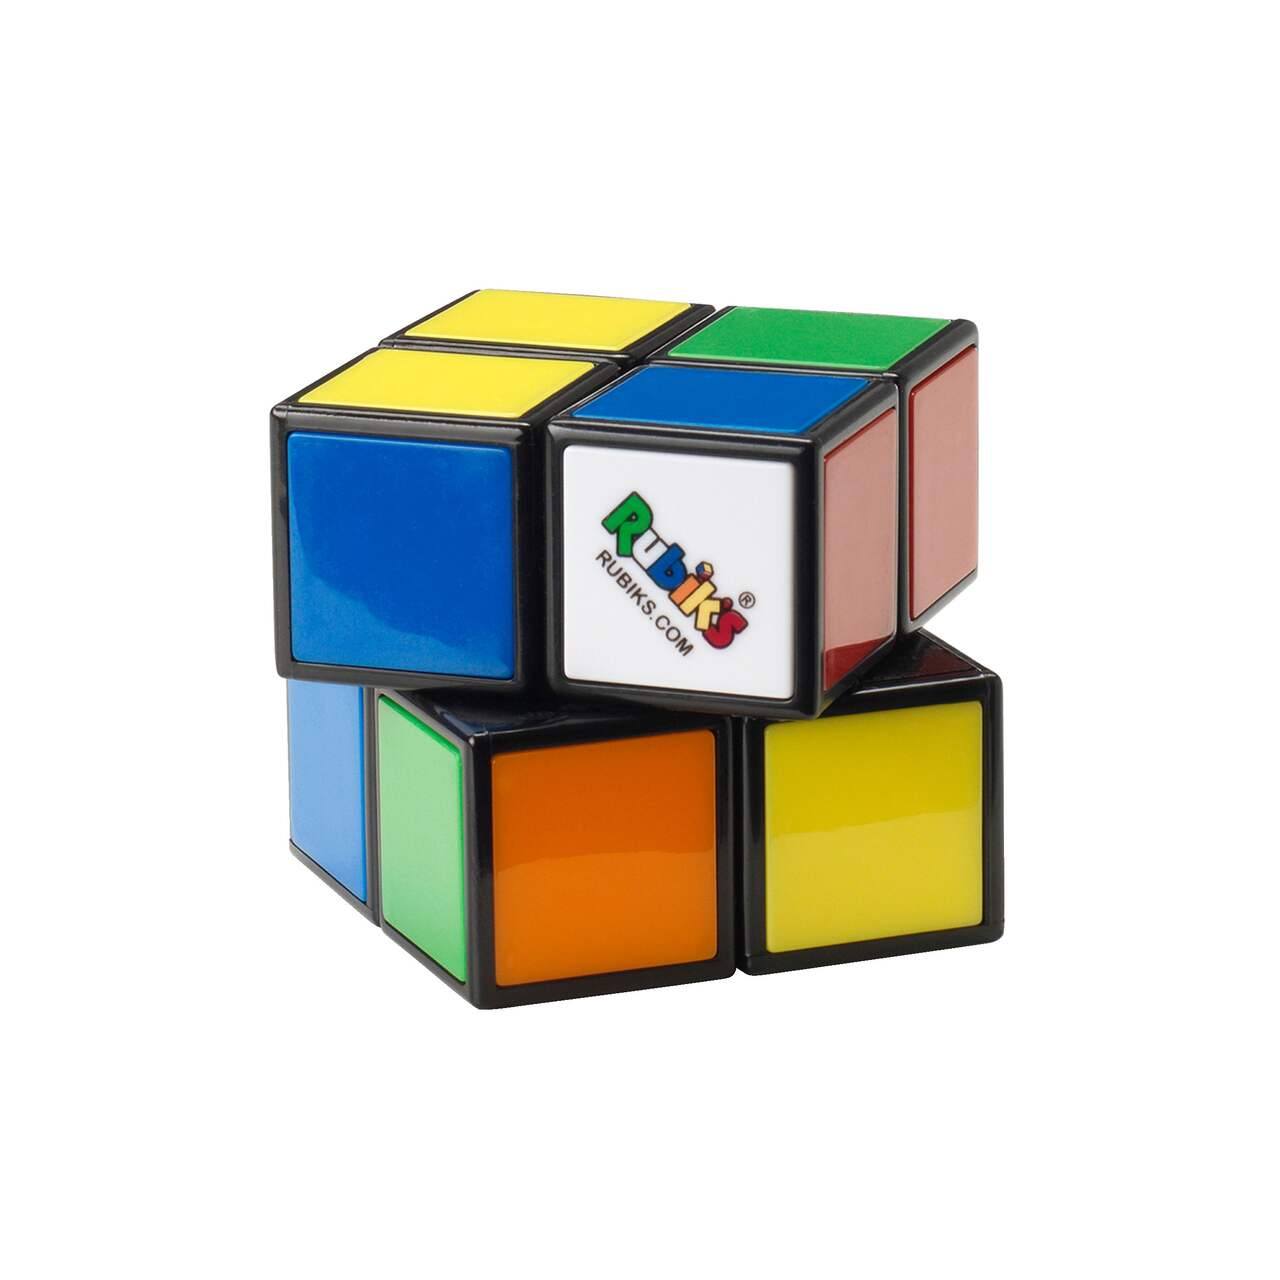 How To Solve 2x2 Cube With One Look